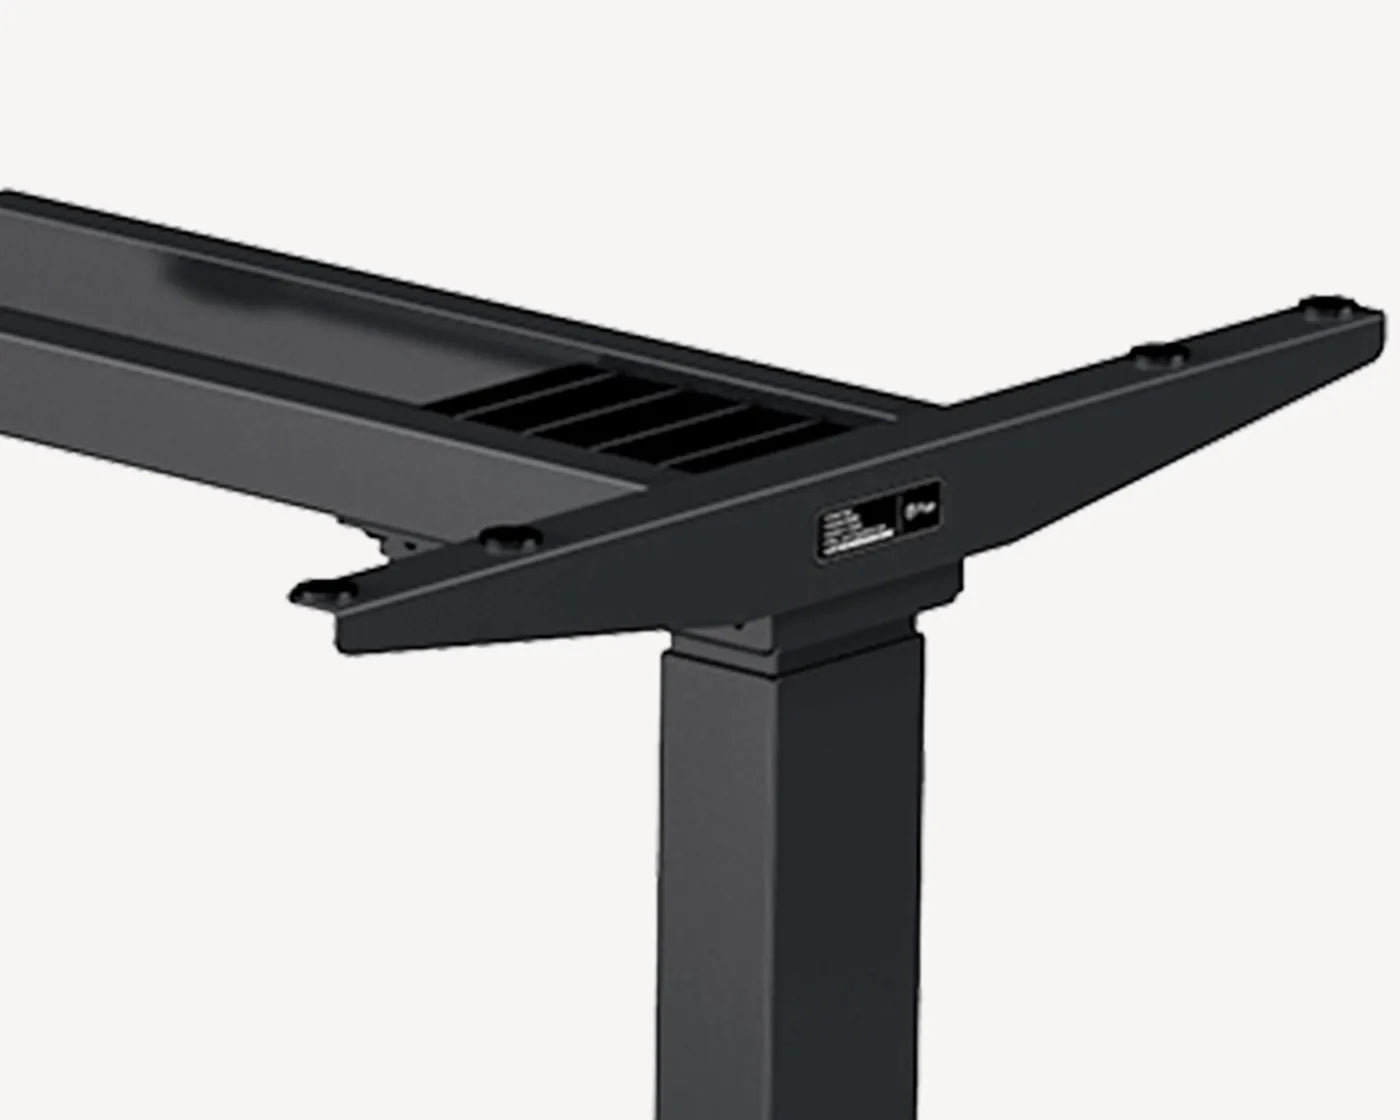 Detail of Flujo SmartAxle's advanced dual motor system for height adjustment on standing desk.